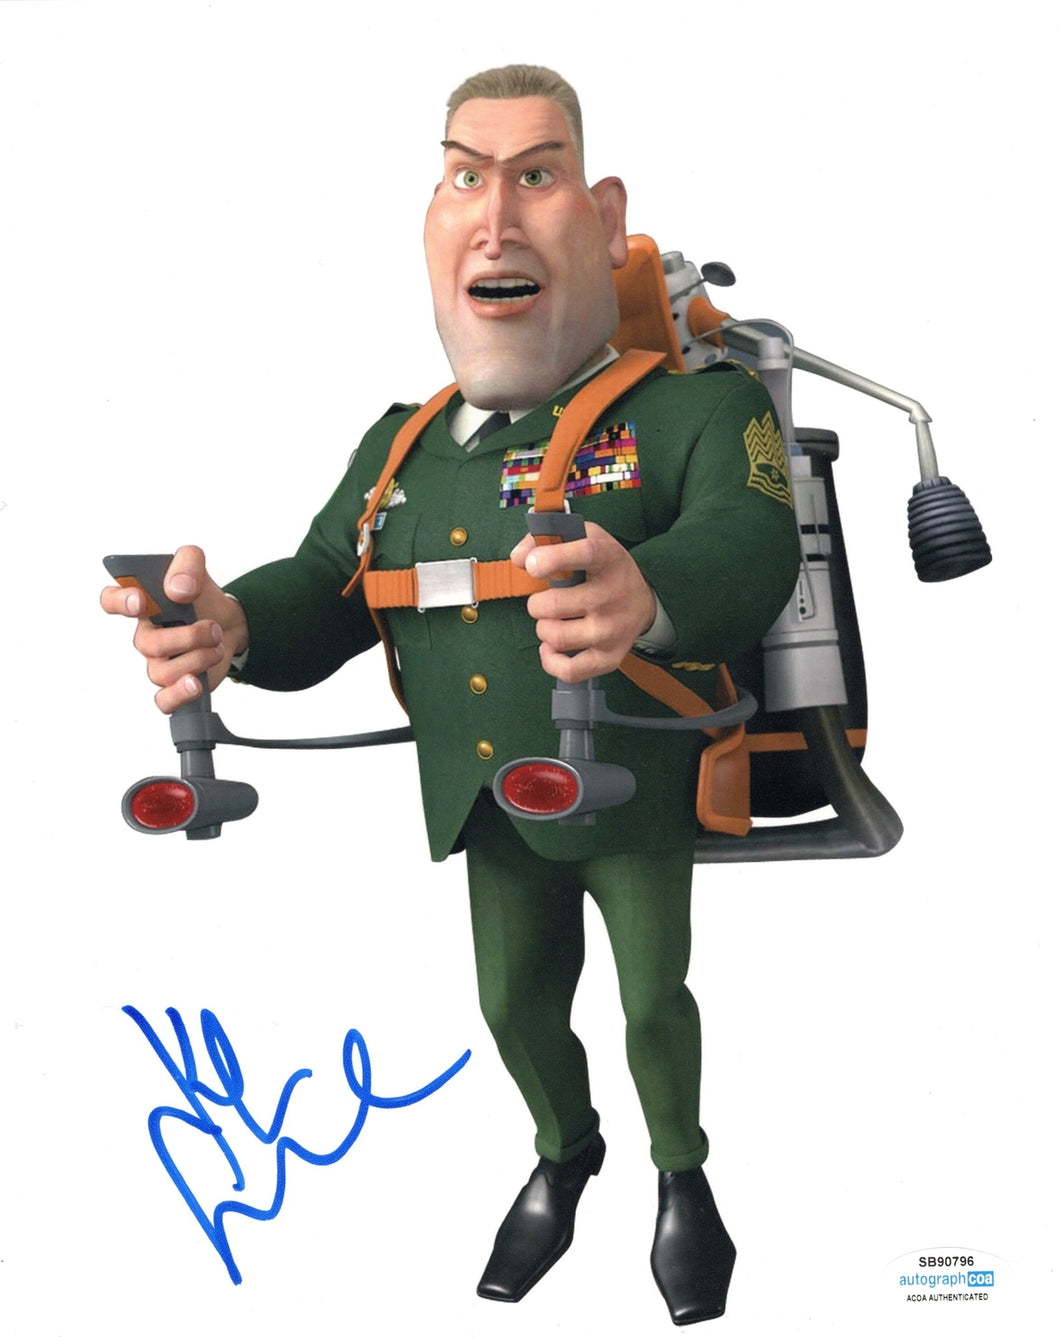 Kiefer Sutherland Autographed Signed 8x10 Monsters vs Aliens General Photo